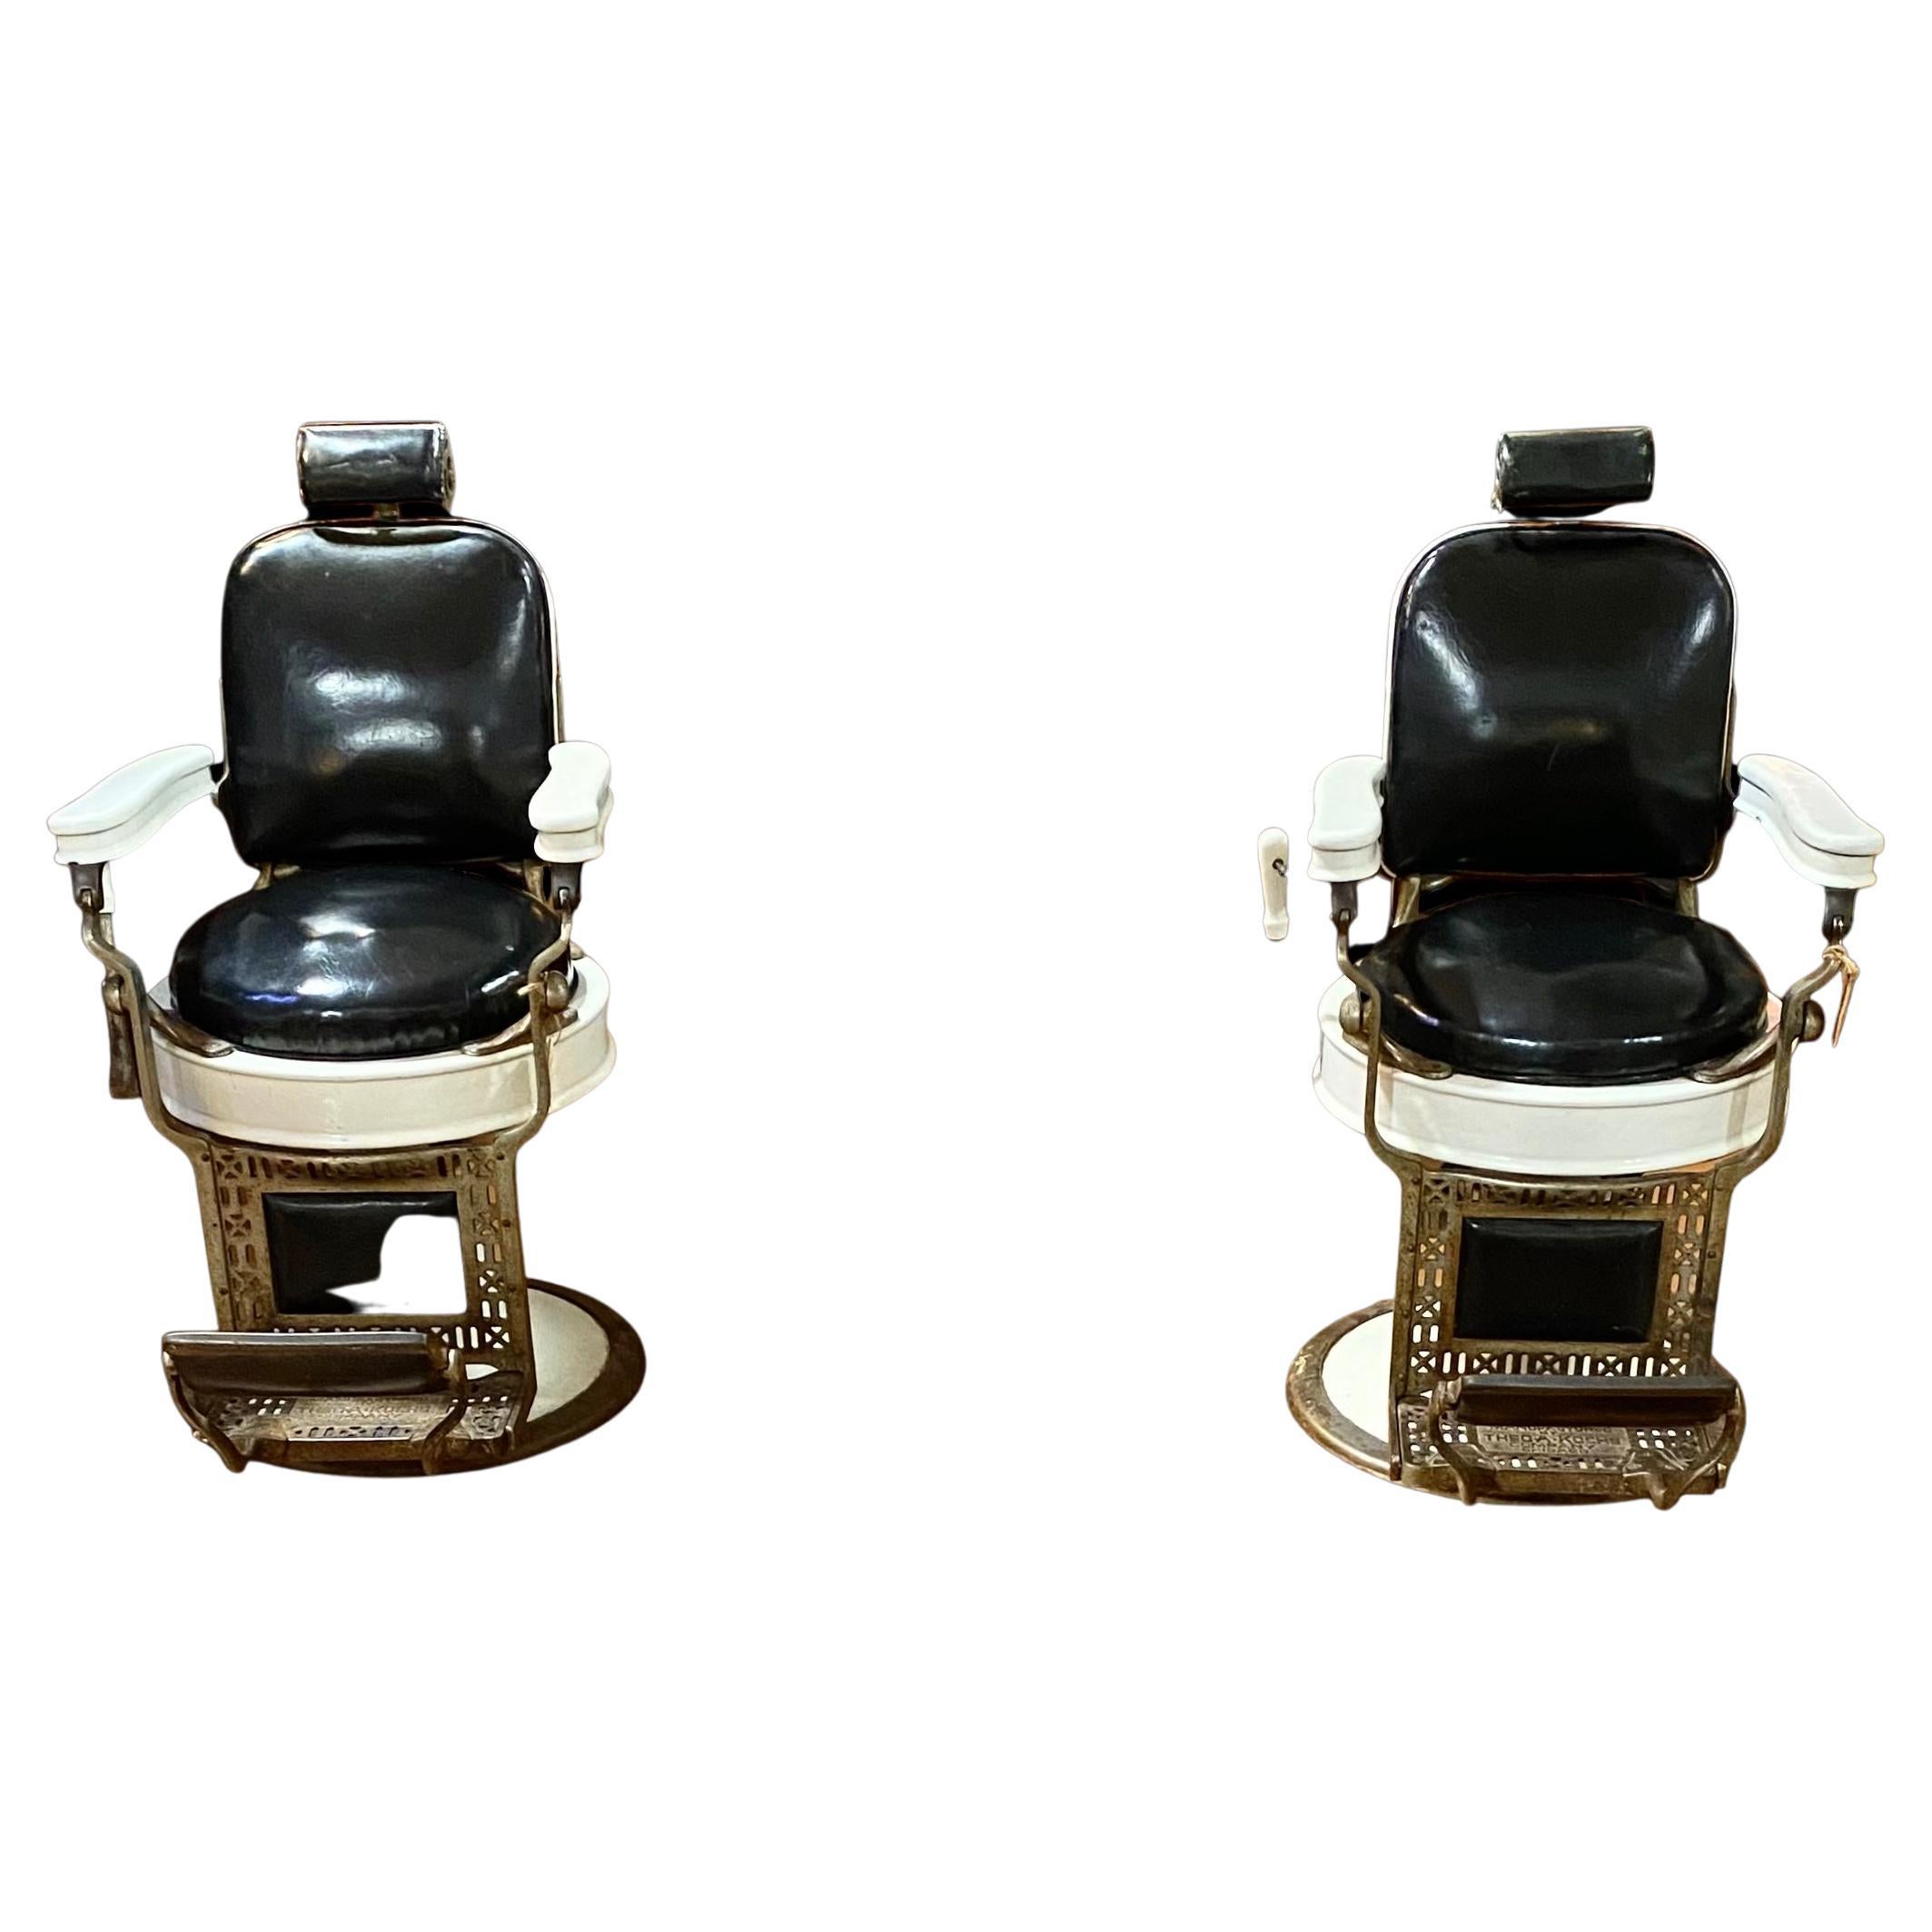 Pair Of Antique Kochs, Chicago Porcelain reclining Adjustable Barber Chairs
Single pedestal swivel barbers chair on circular chrome and white enamel base with pivoting footrest, white enamelled arms, black leather upholstered circular seat, square